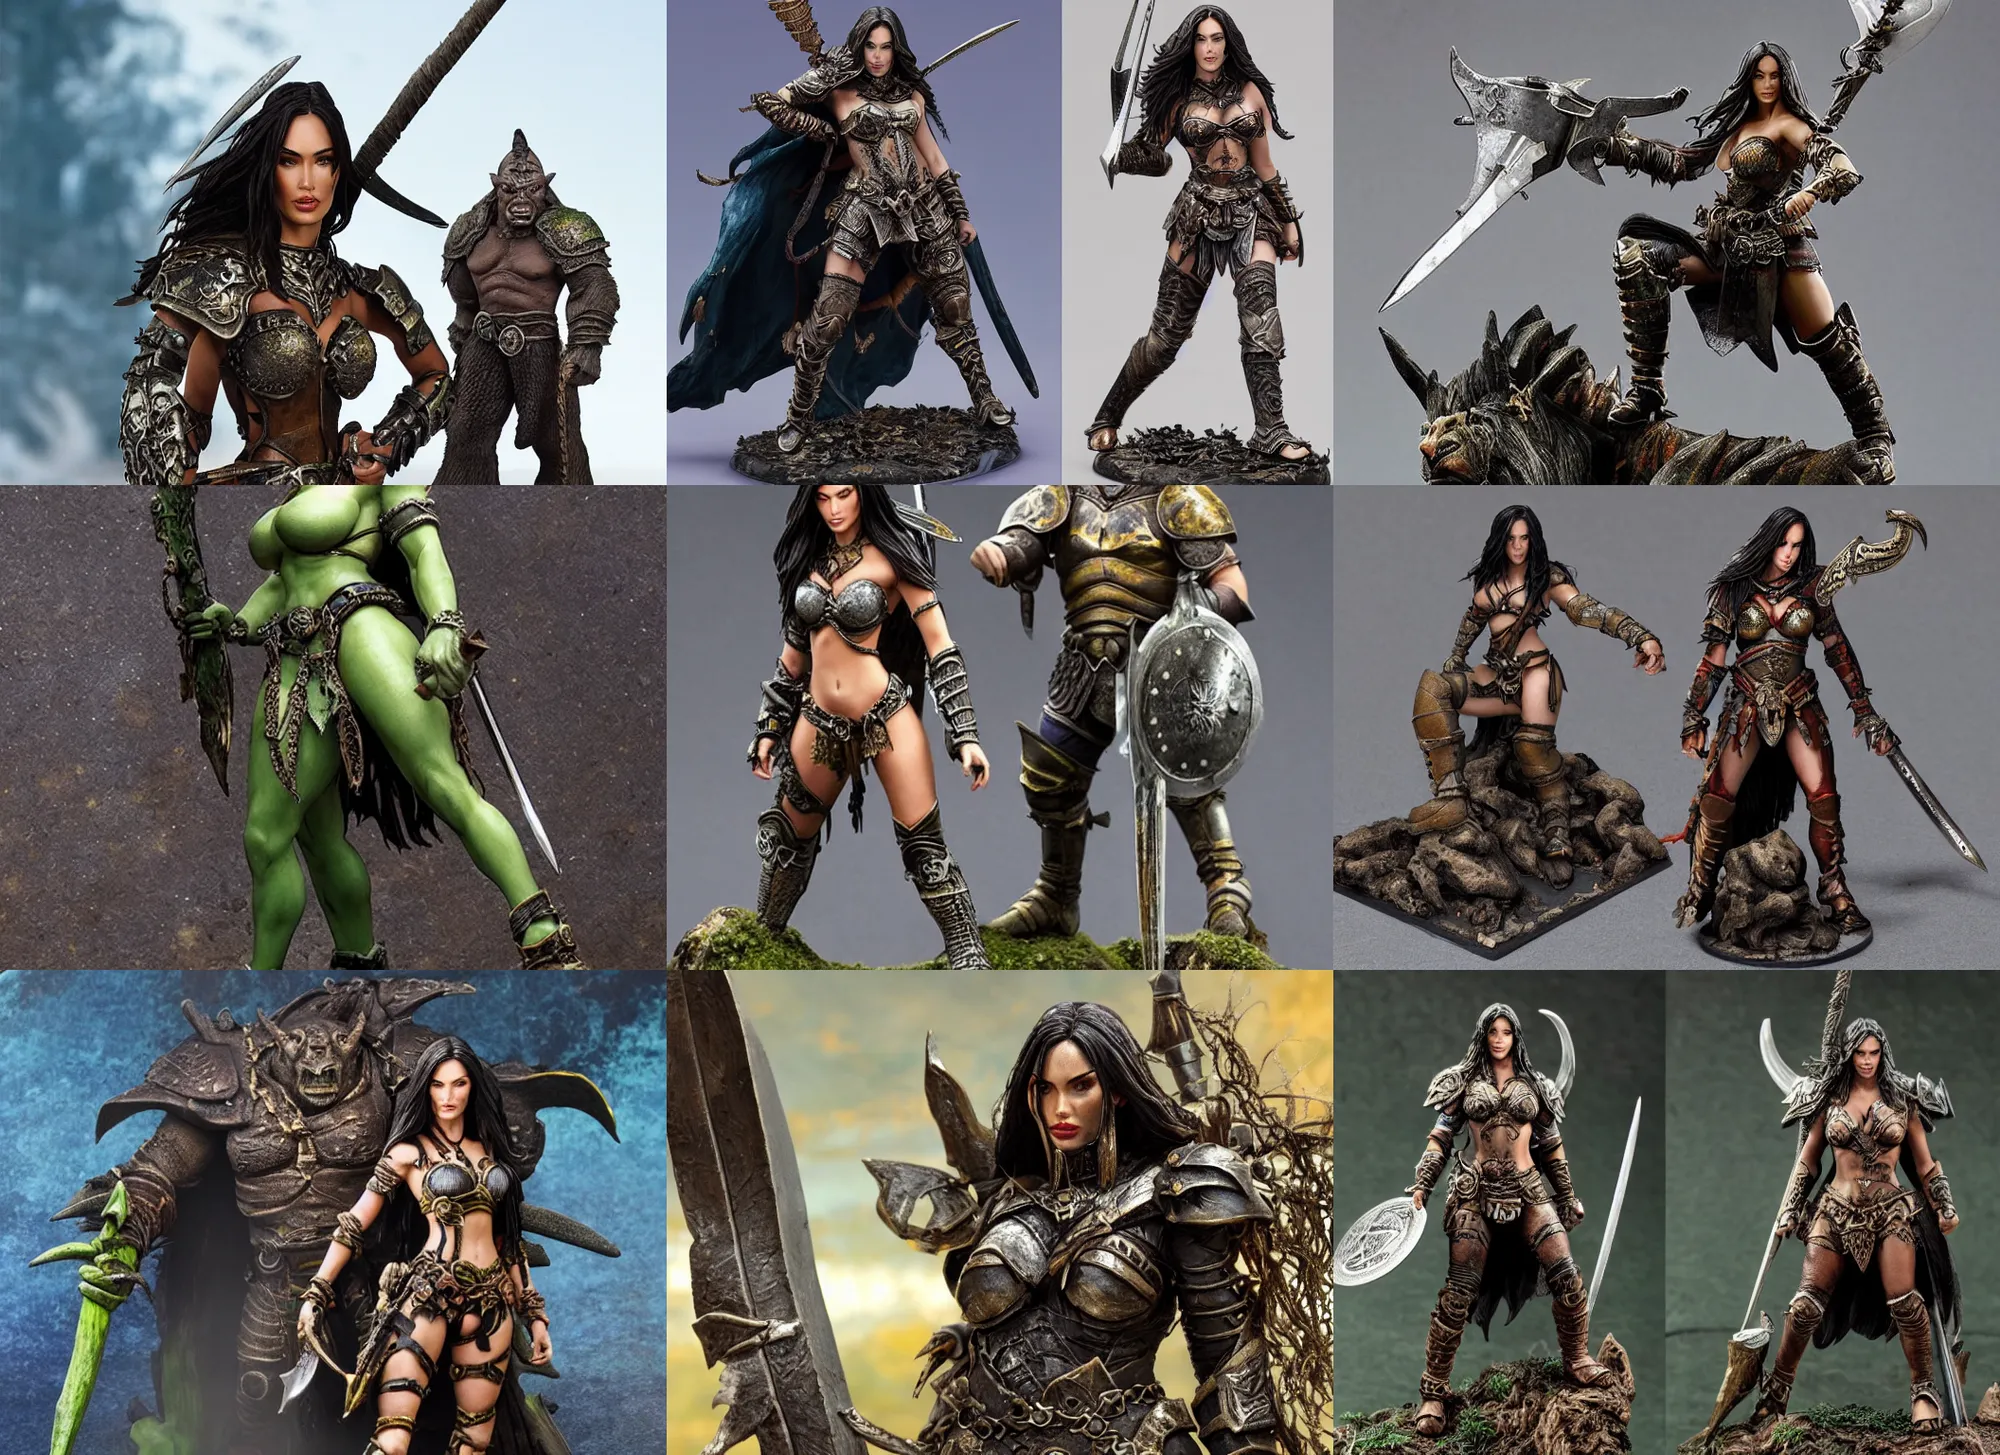 Prompt: Image on the store website, eBay, Full body, 80mm resin detailed miniature of Megan Fox in armor stand next to an orc warrior